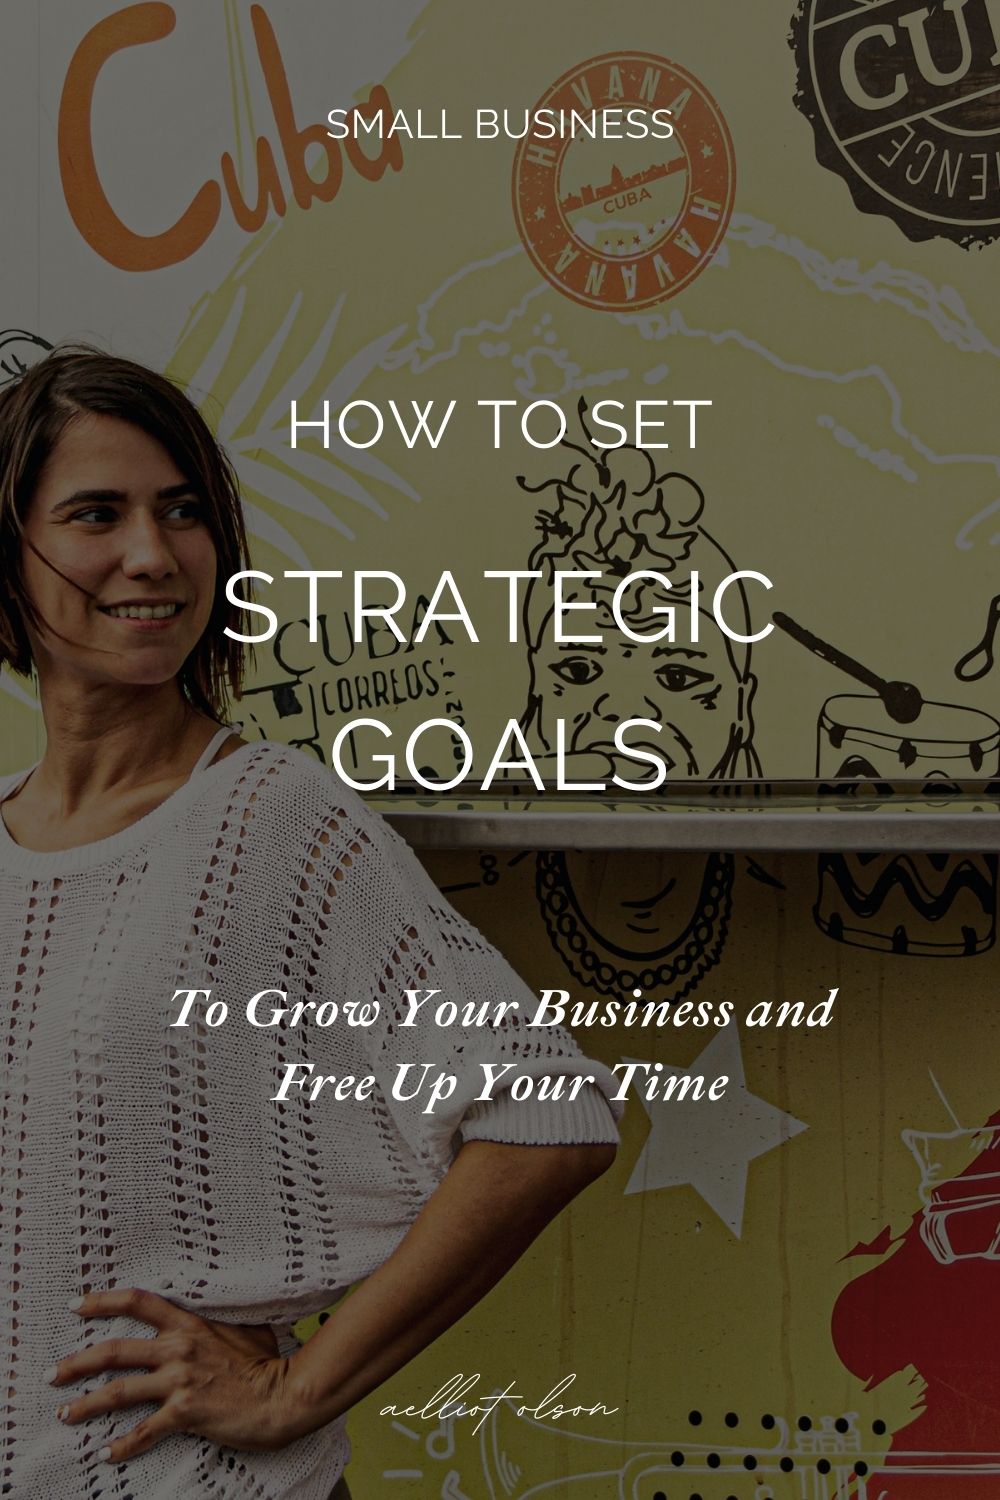 How to set strategic goals to grow your business and free up your time.